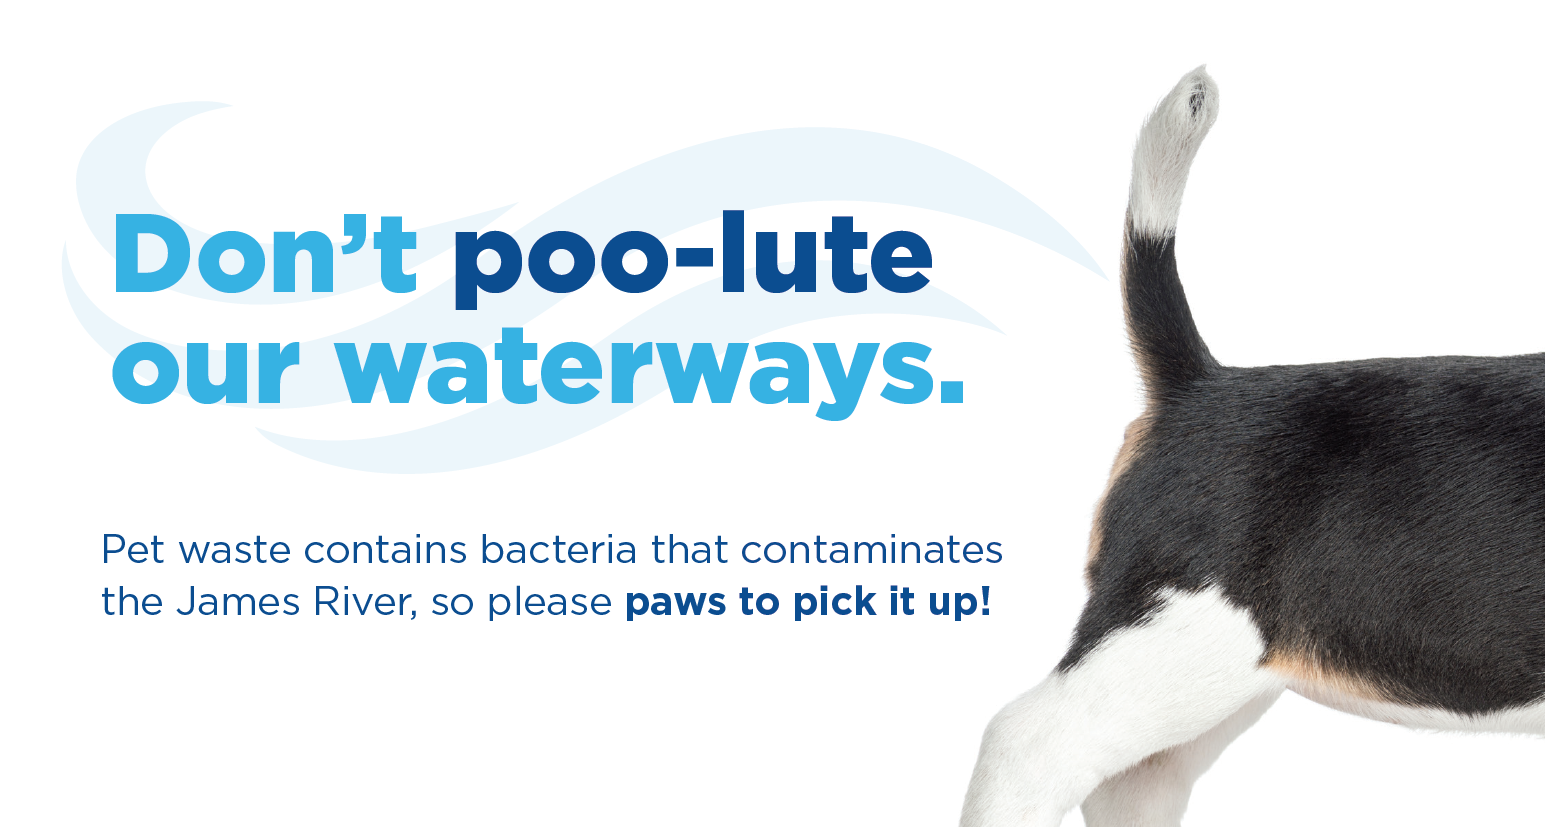 Don't poo-lute our waterways.